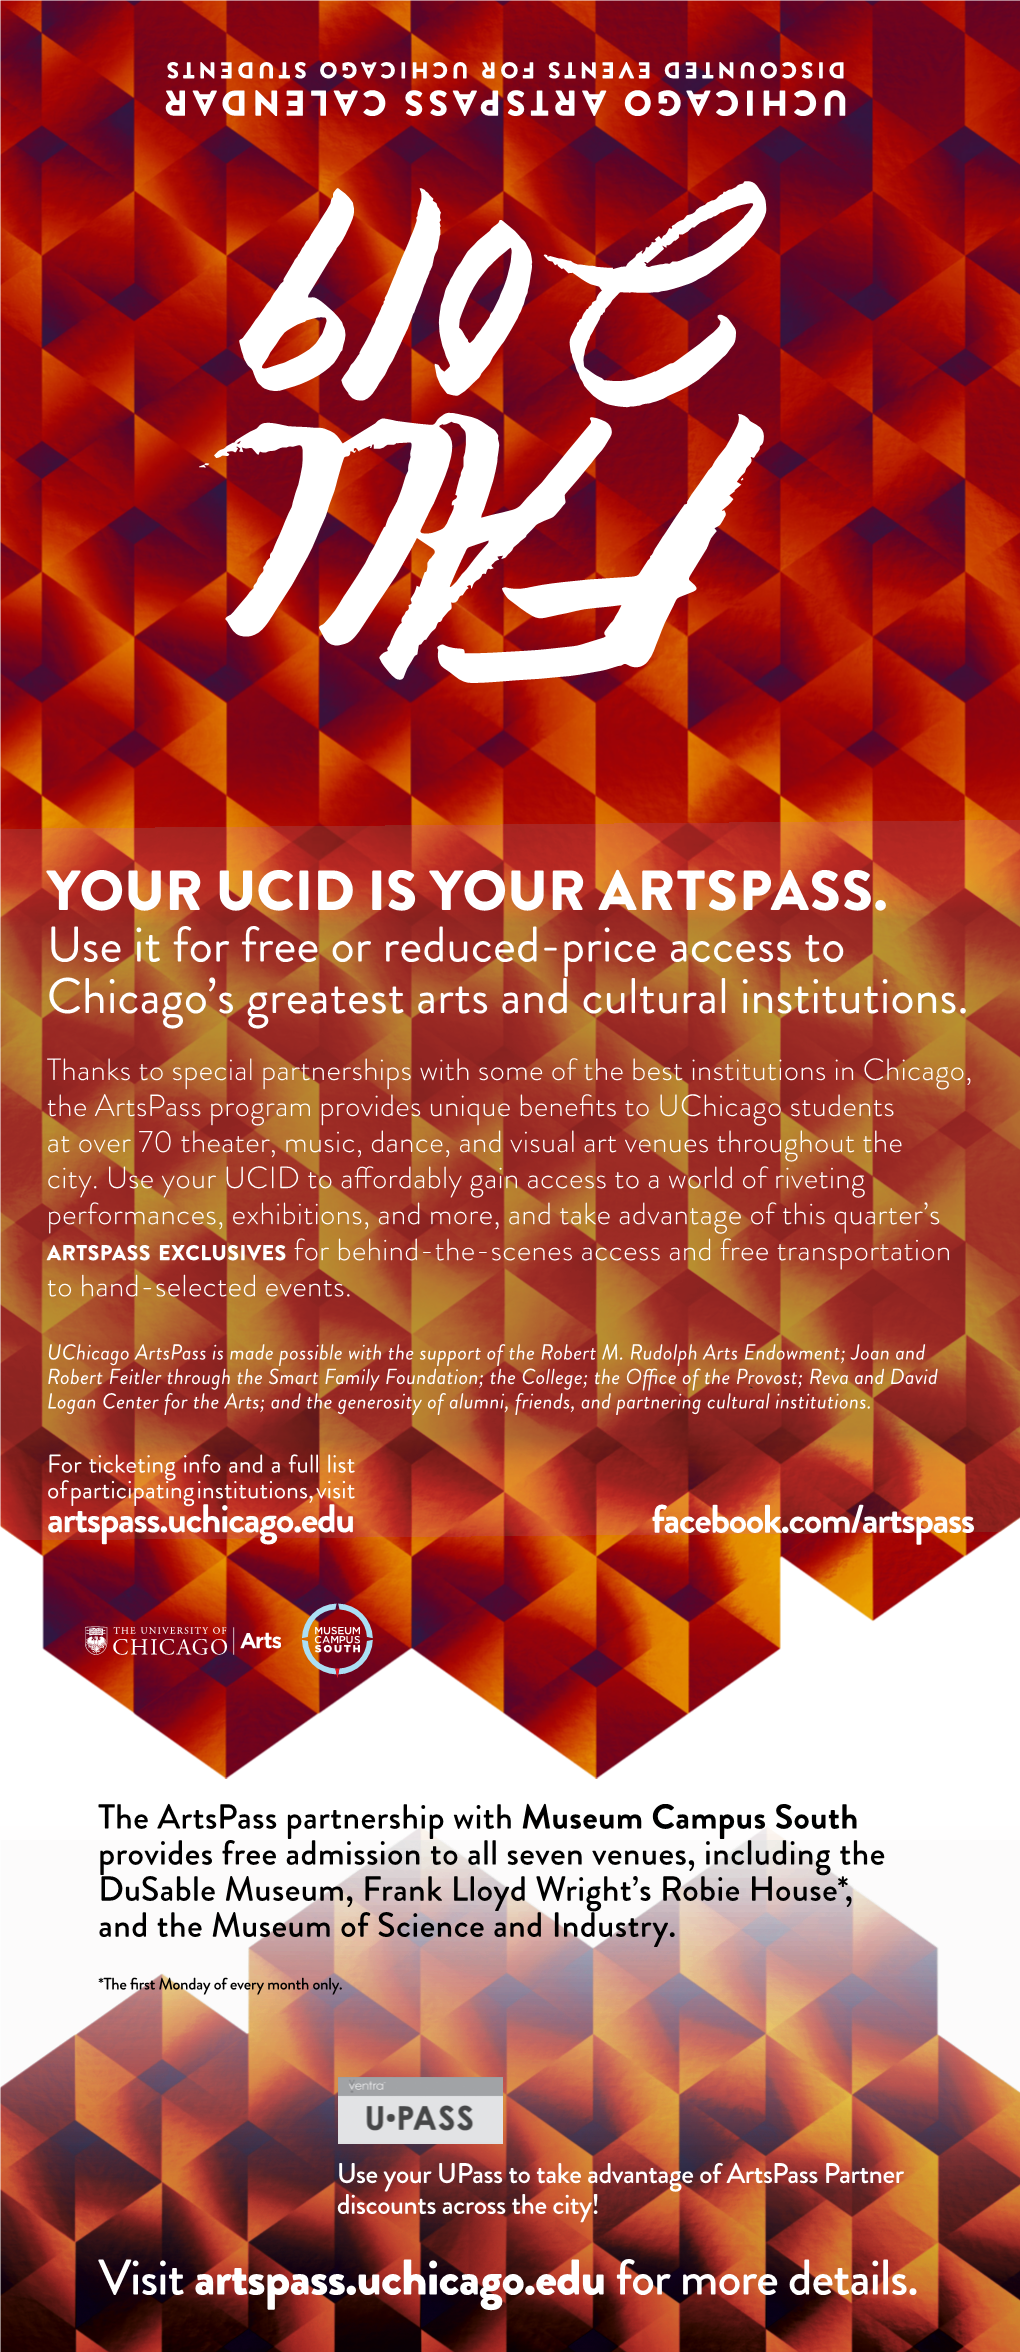 YOUR UCID IS YOUR ARTSPASS. Use It for Free Or Reduced-Price Access to Chicago’S Greatest Arts and Cultural Institutions